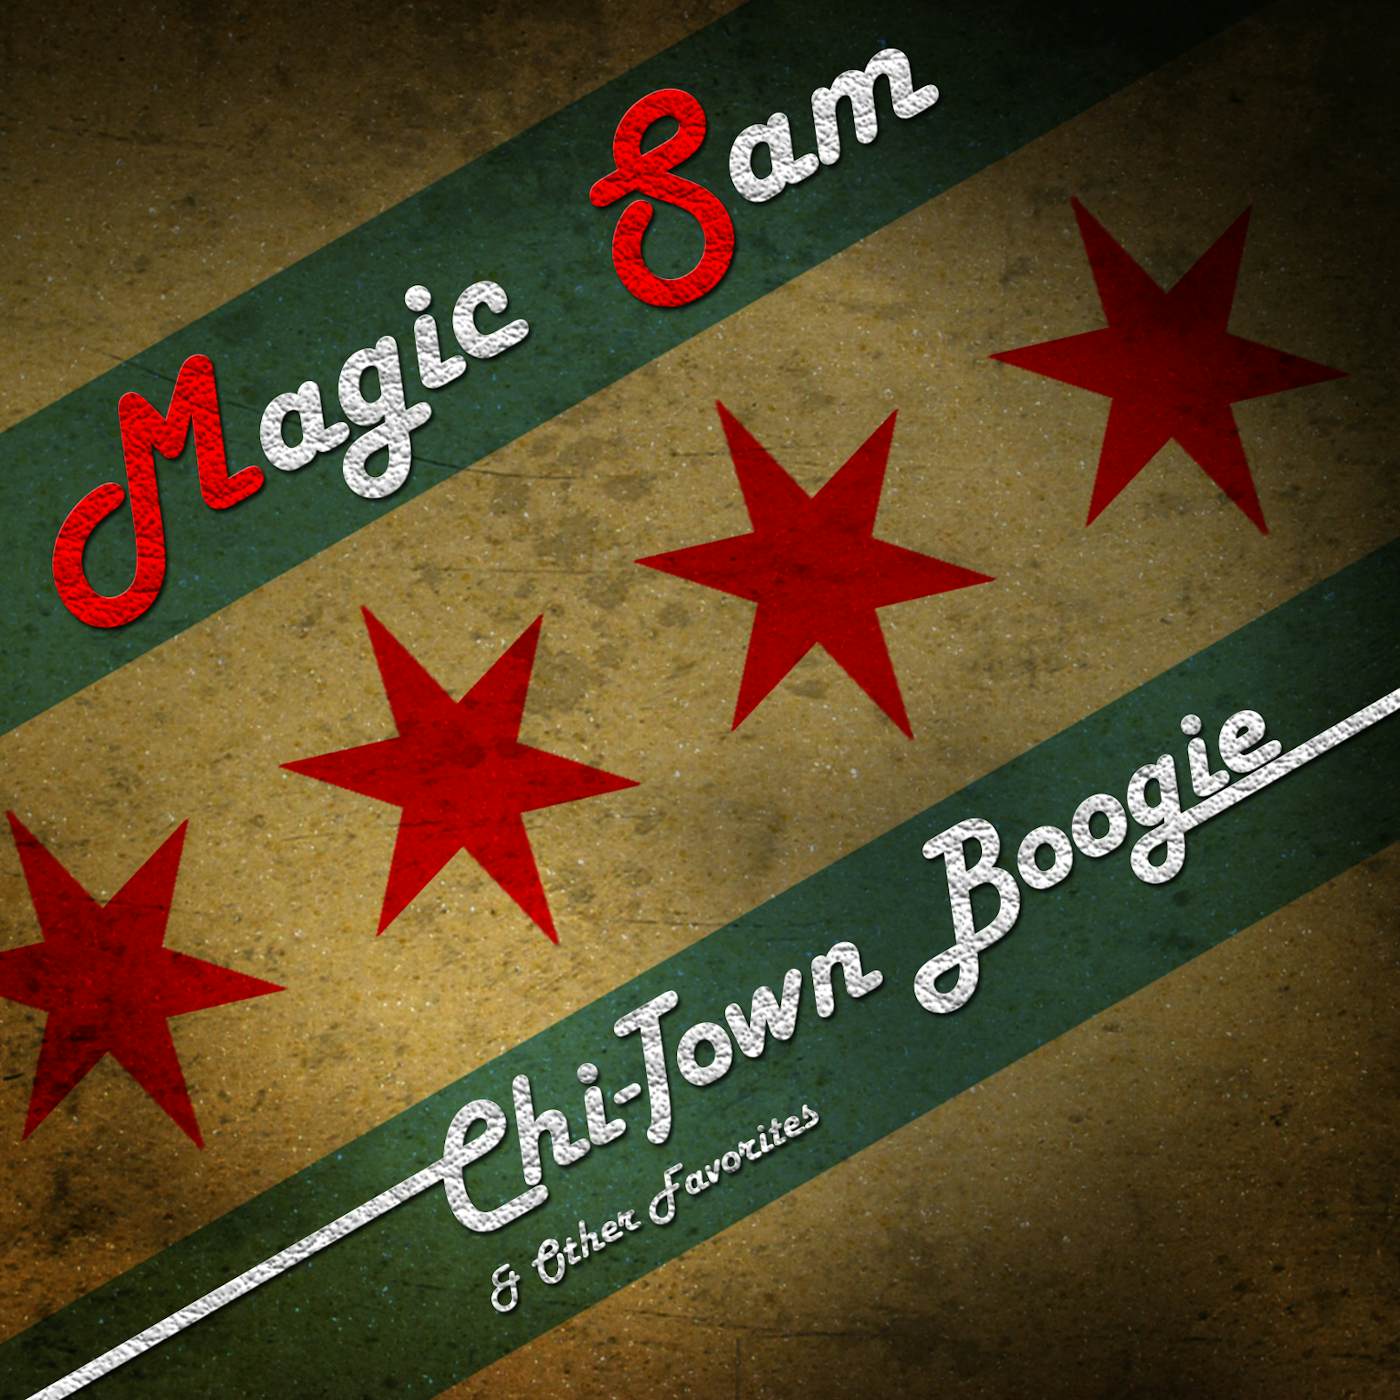 Magic Sam CHI-TOWN BOOGIE & OTHER FAVORITES CD